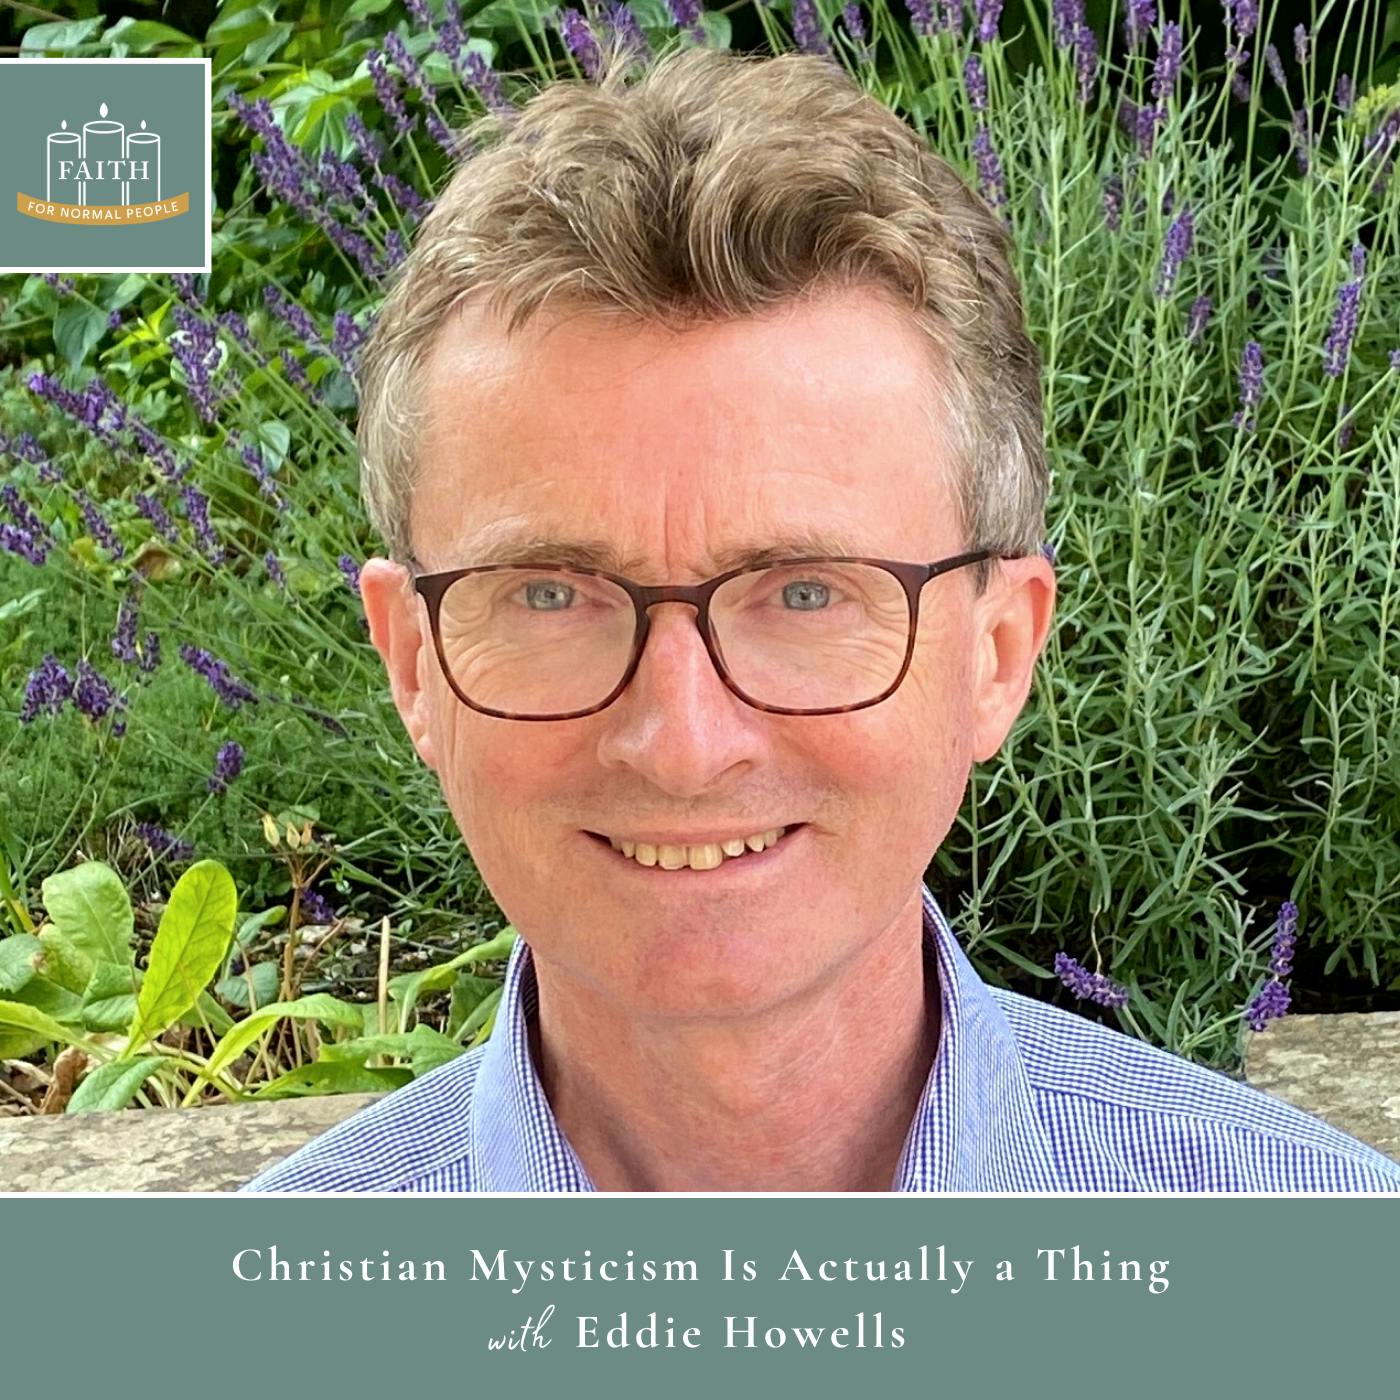 [Faith] Episode 25: Eddie Howells - Christian Mysticism Is Actually a Thing